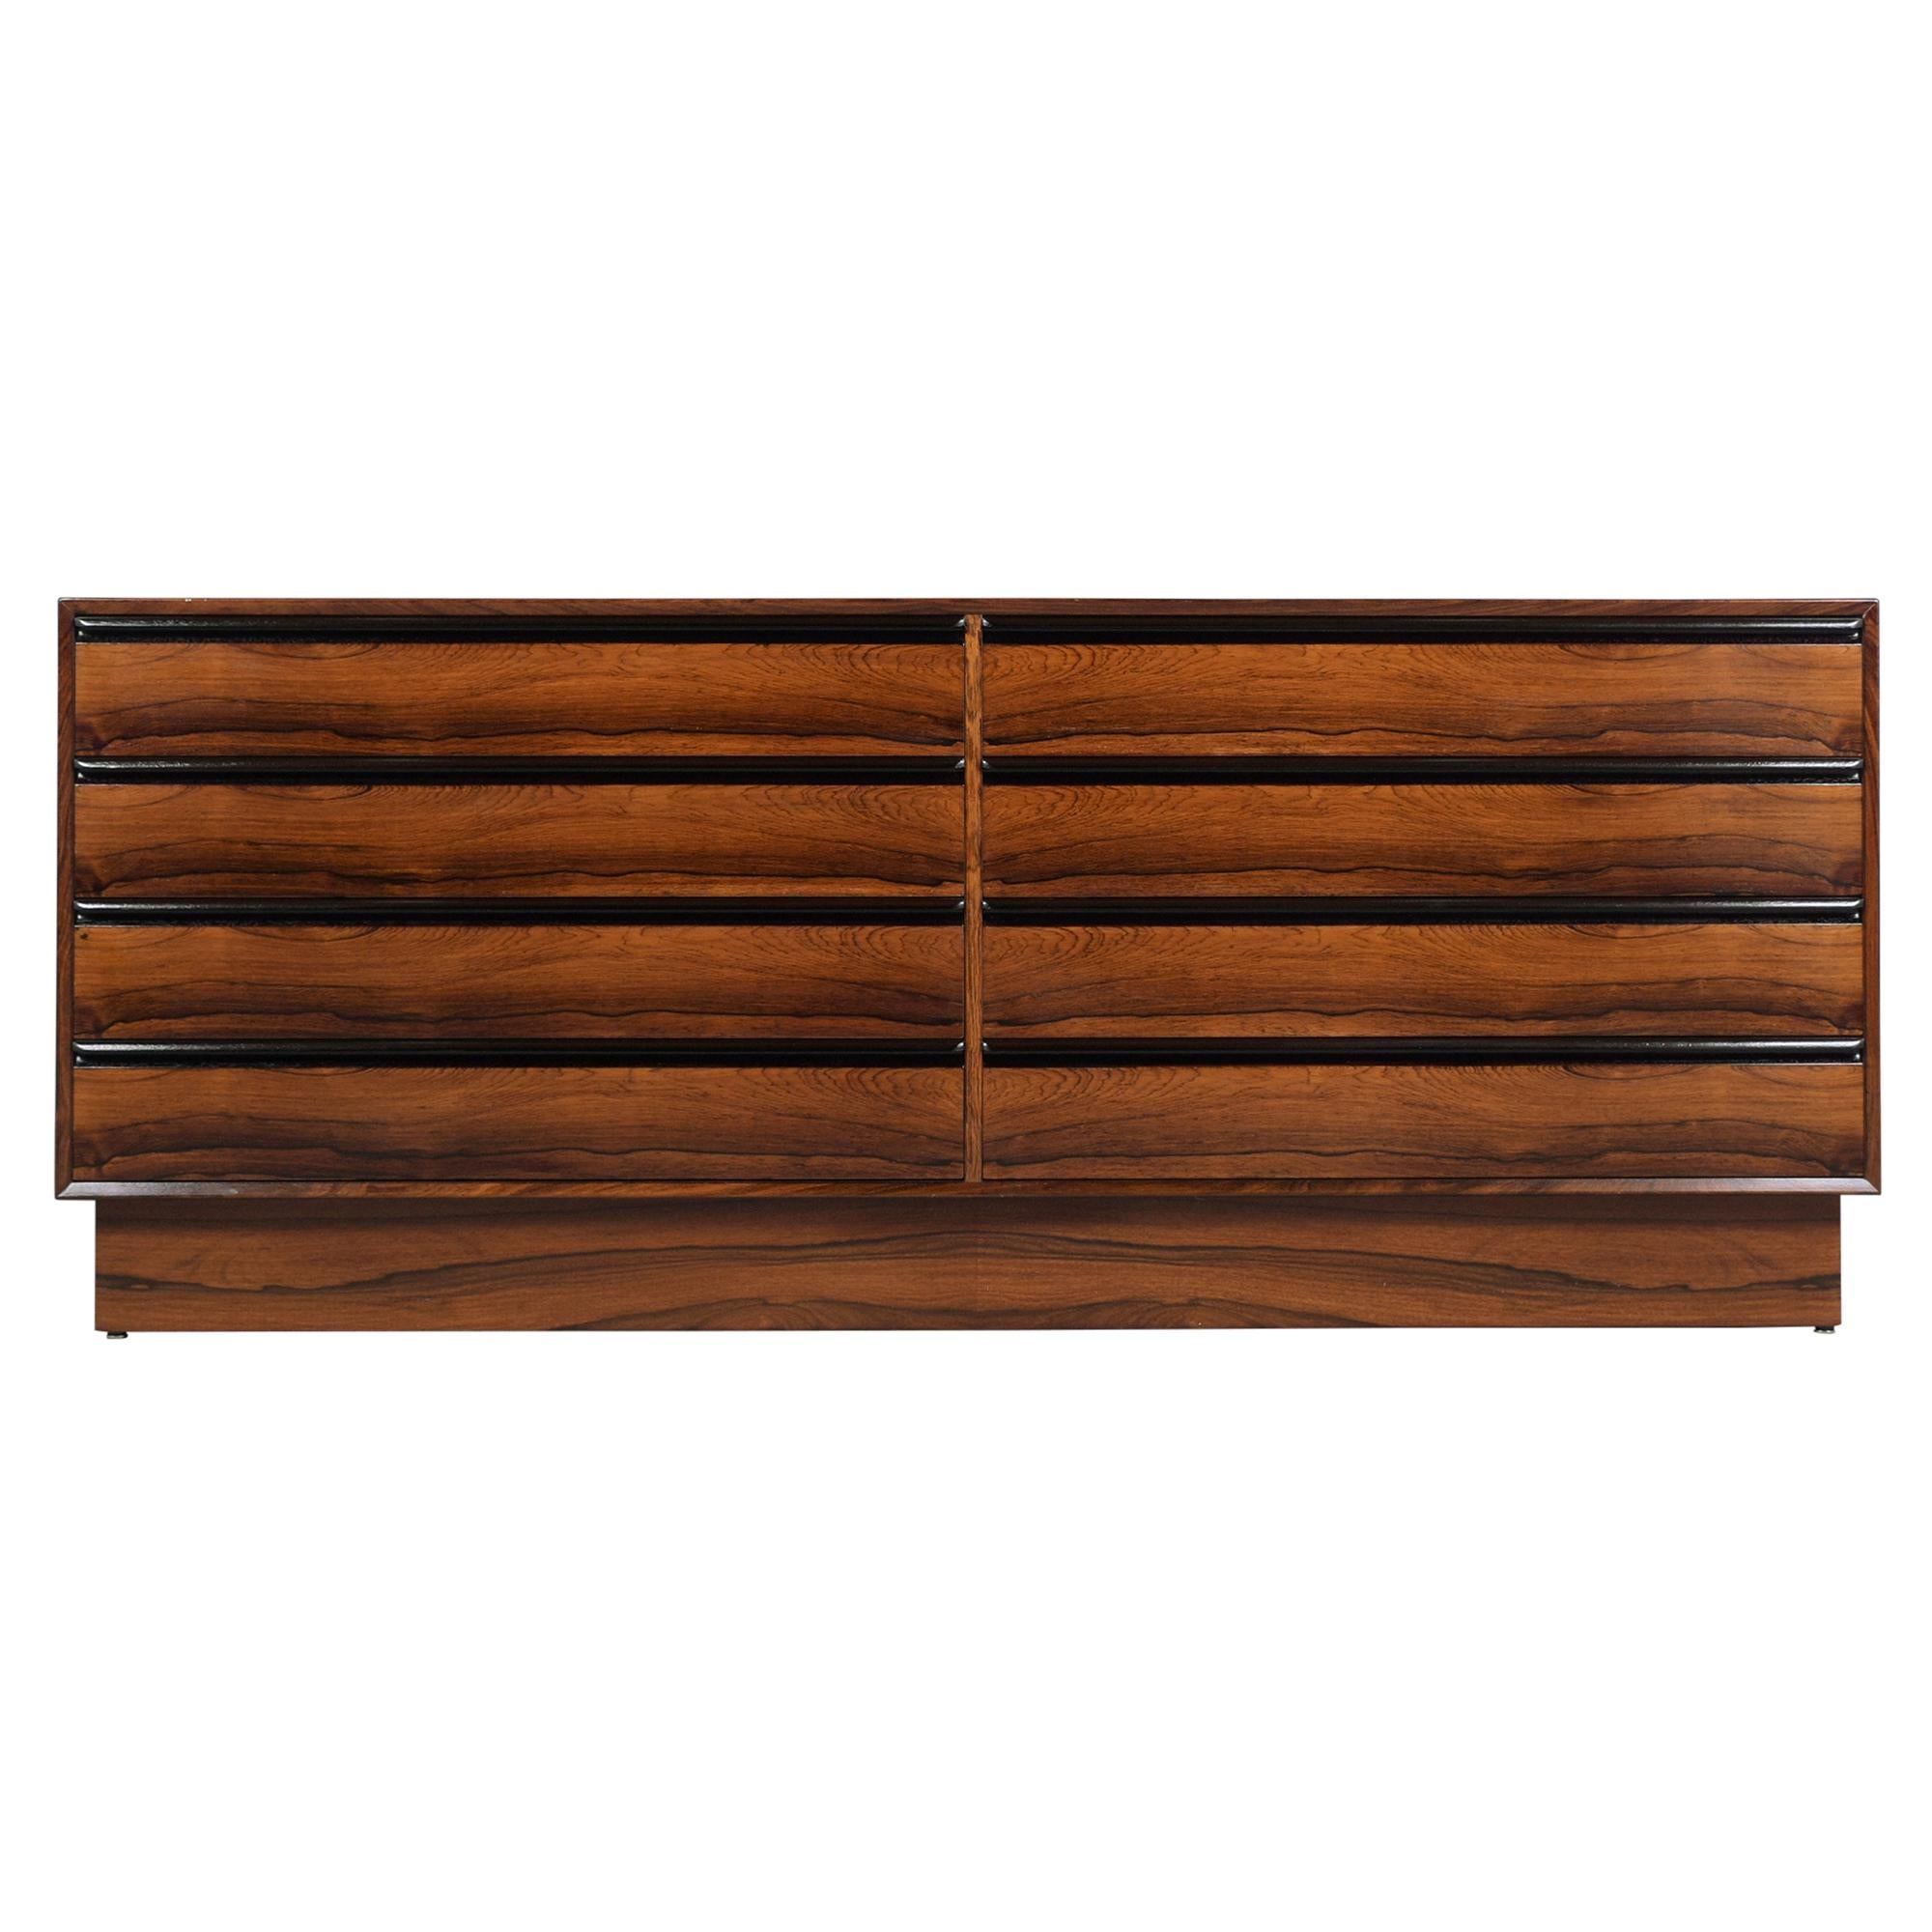 A remarkable Danish modern chest of drawers that has been professionally restored, is hand-crafted out of rosewood and has been newly finished in mahogany and ebonized color combination. The dresser features eight drawers each with carved handles